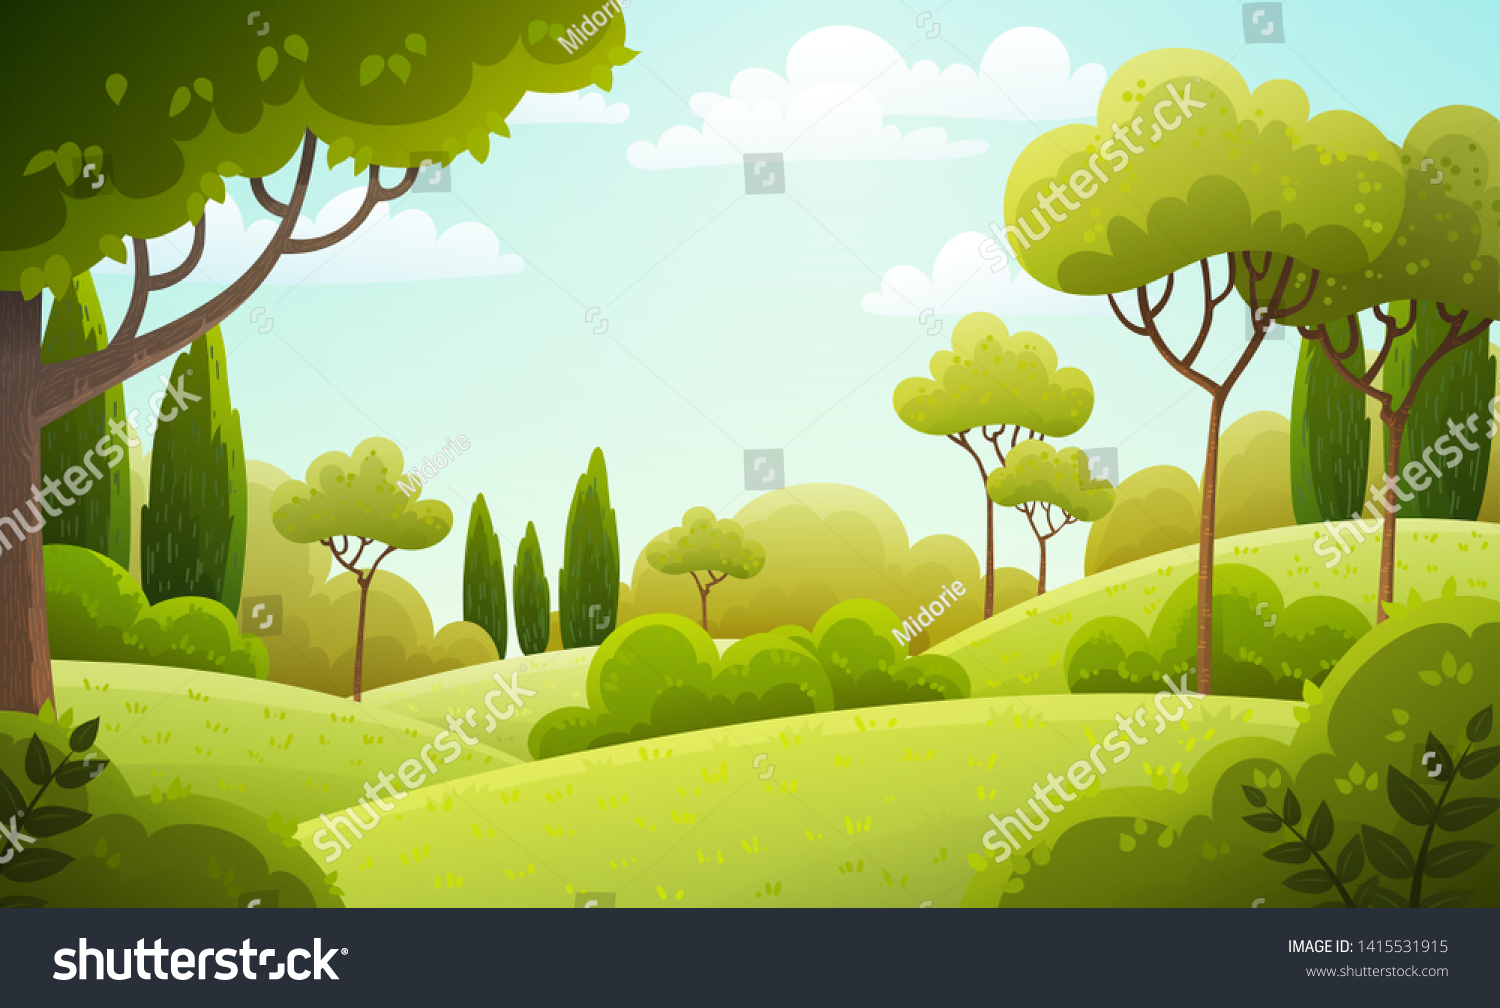 SVG of Vector illustration background of the Italian countryside. Hill landscape with pines and cypresses. Spring scenery with green grass and blue sky. svg